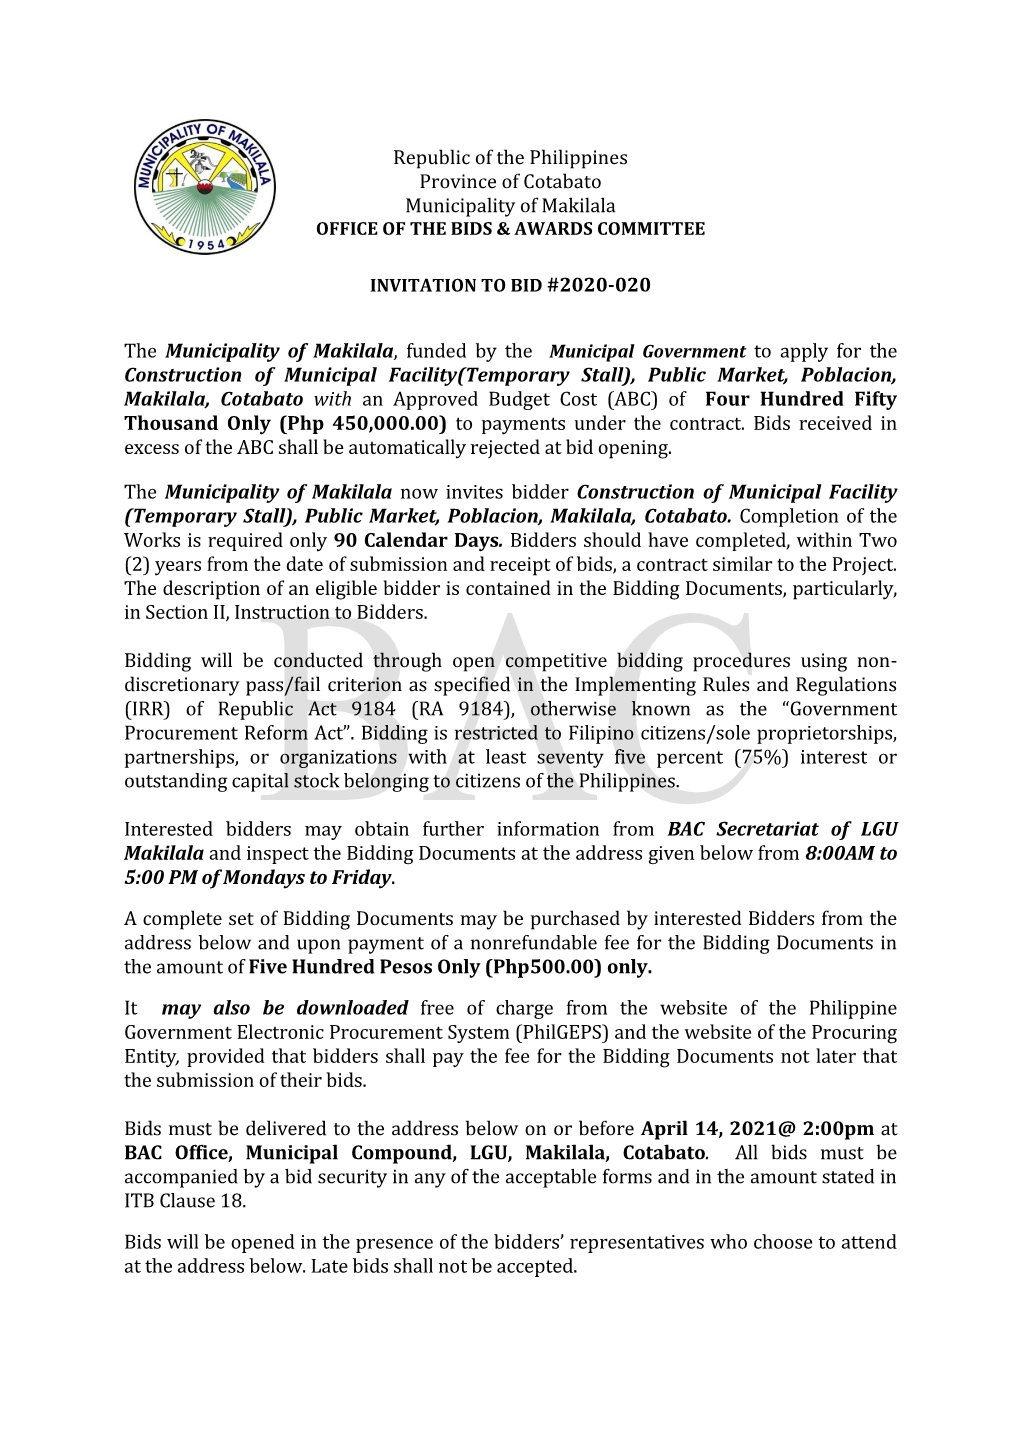 Republic of the Philippines Province of Cotabato Municipality of Makilala OFFICE of the BIDS & AWARDS COMMITTEE